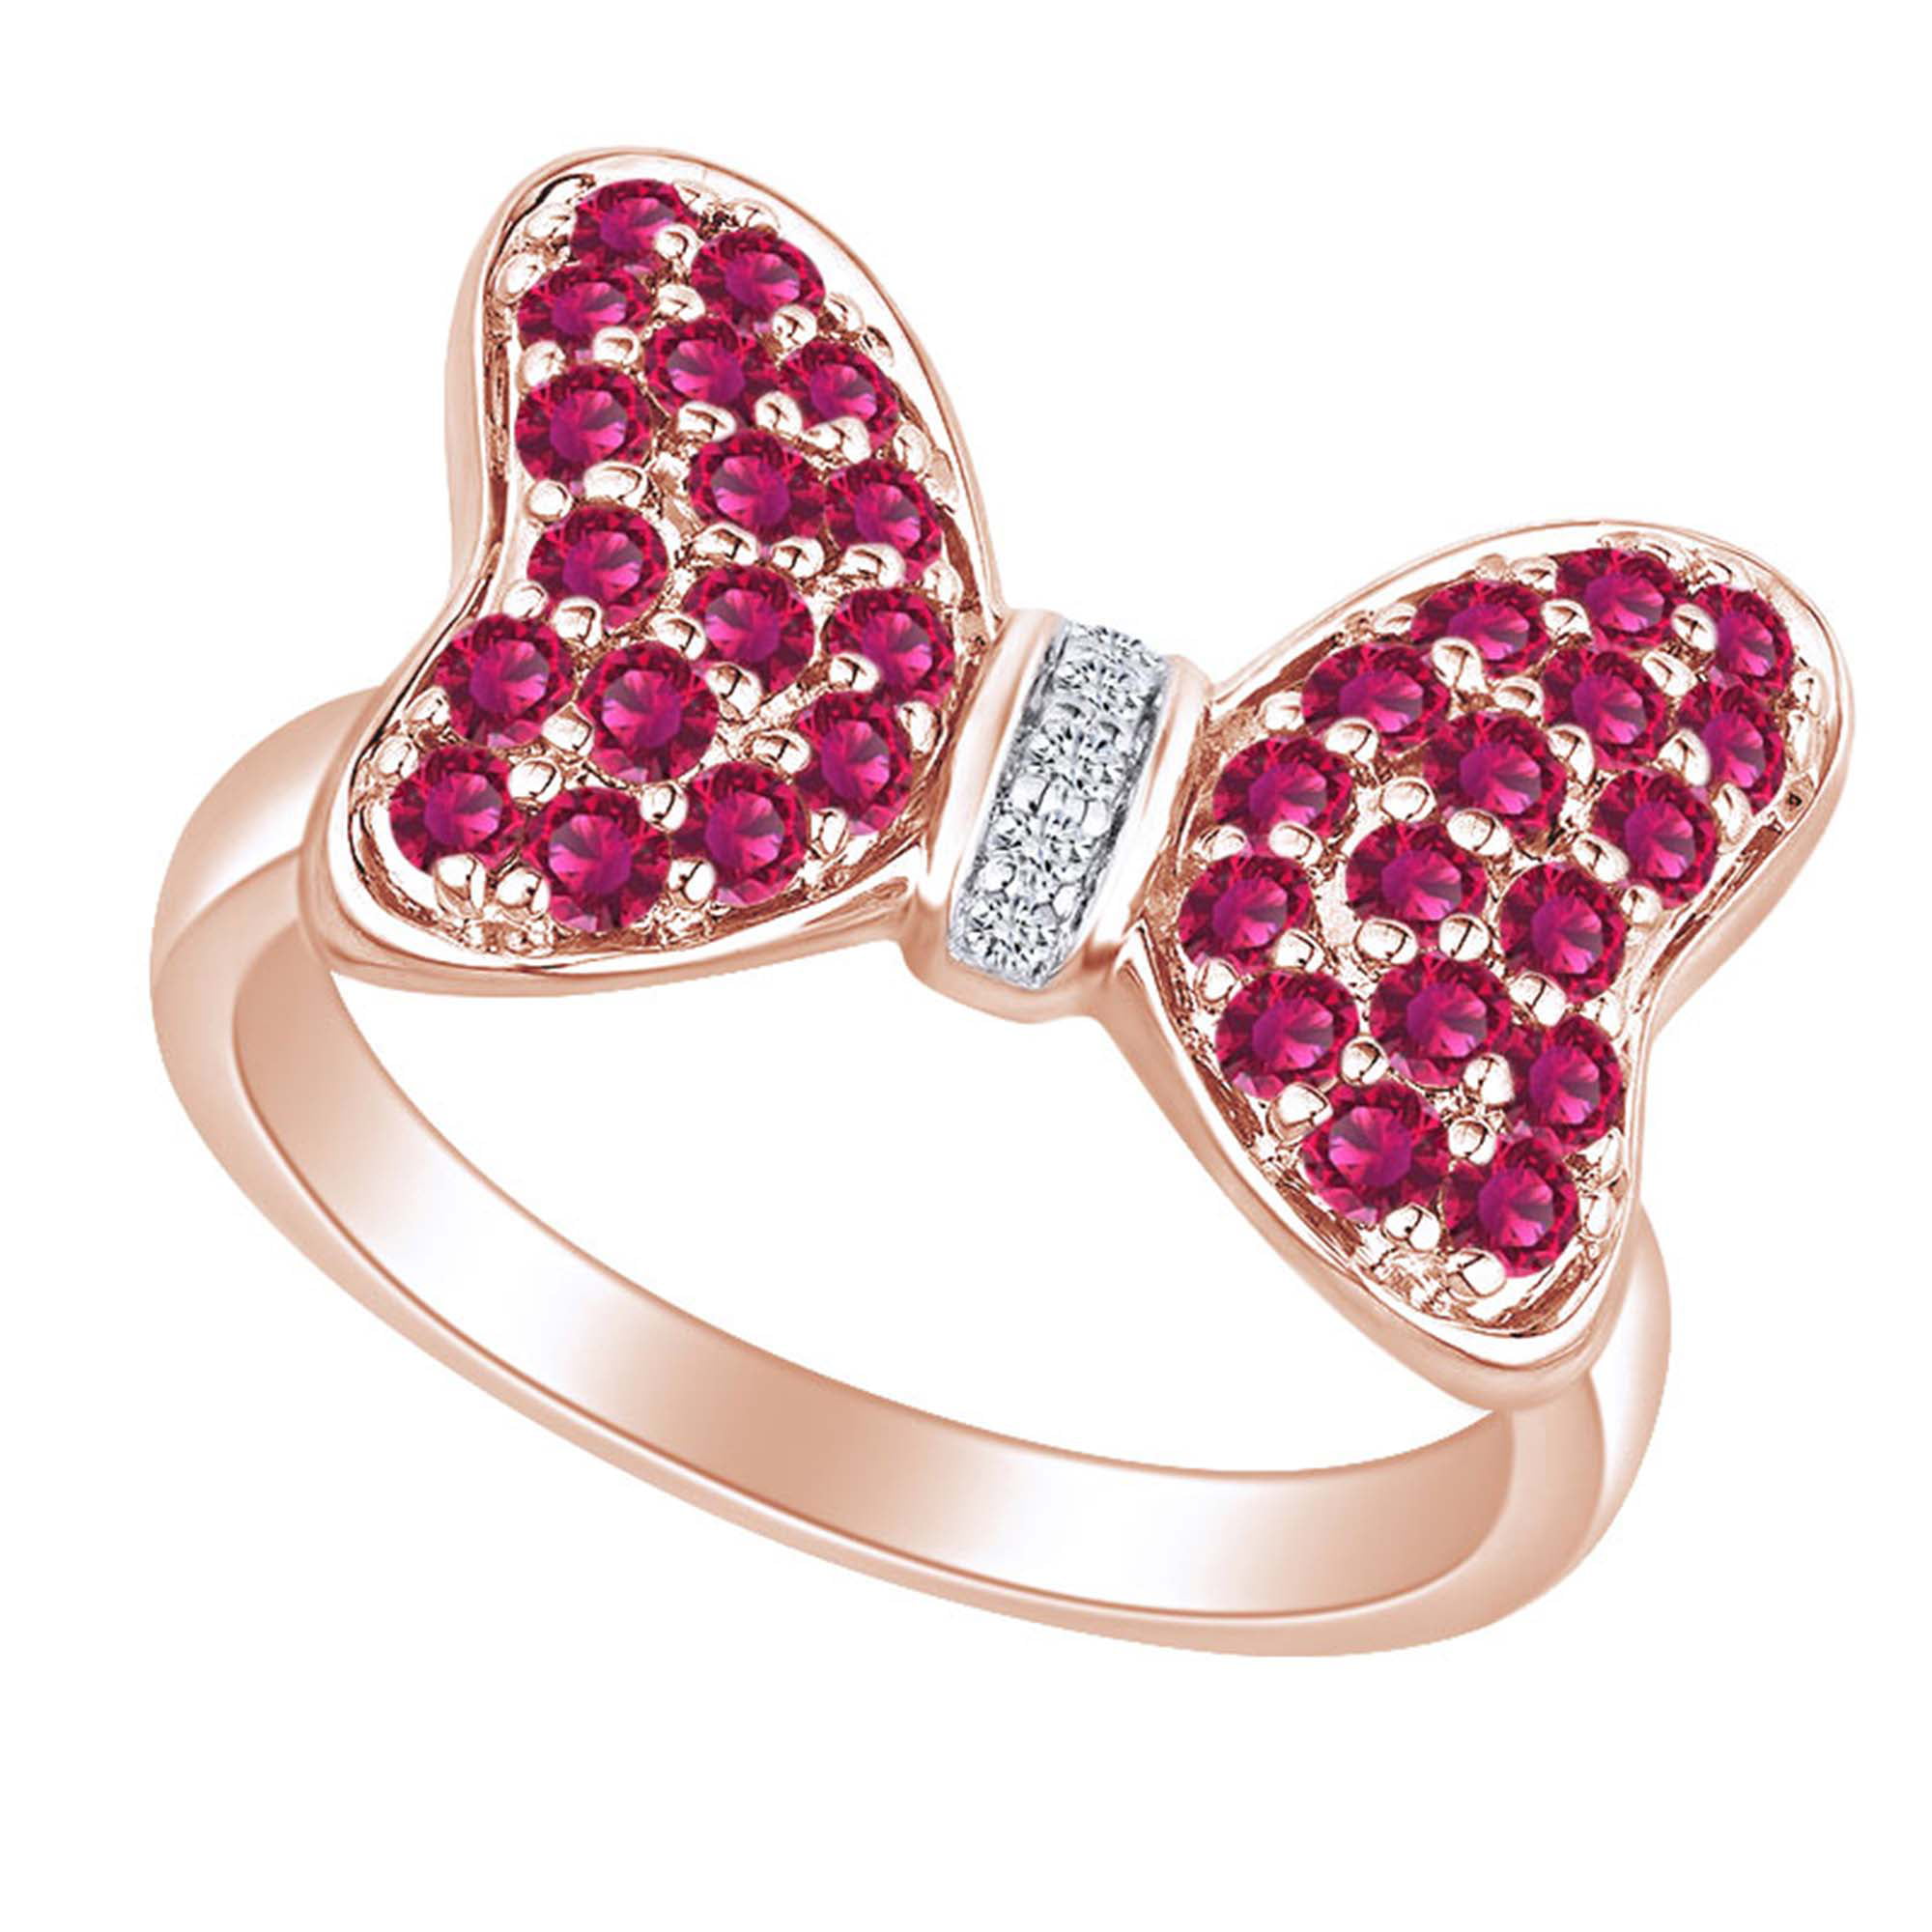 Size 5 Details about   Sterling Silver Gold Finish Dark Pink Cubic Zirconia Bow Ring 